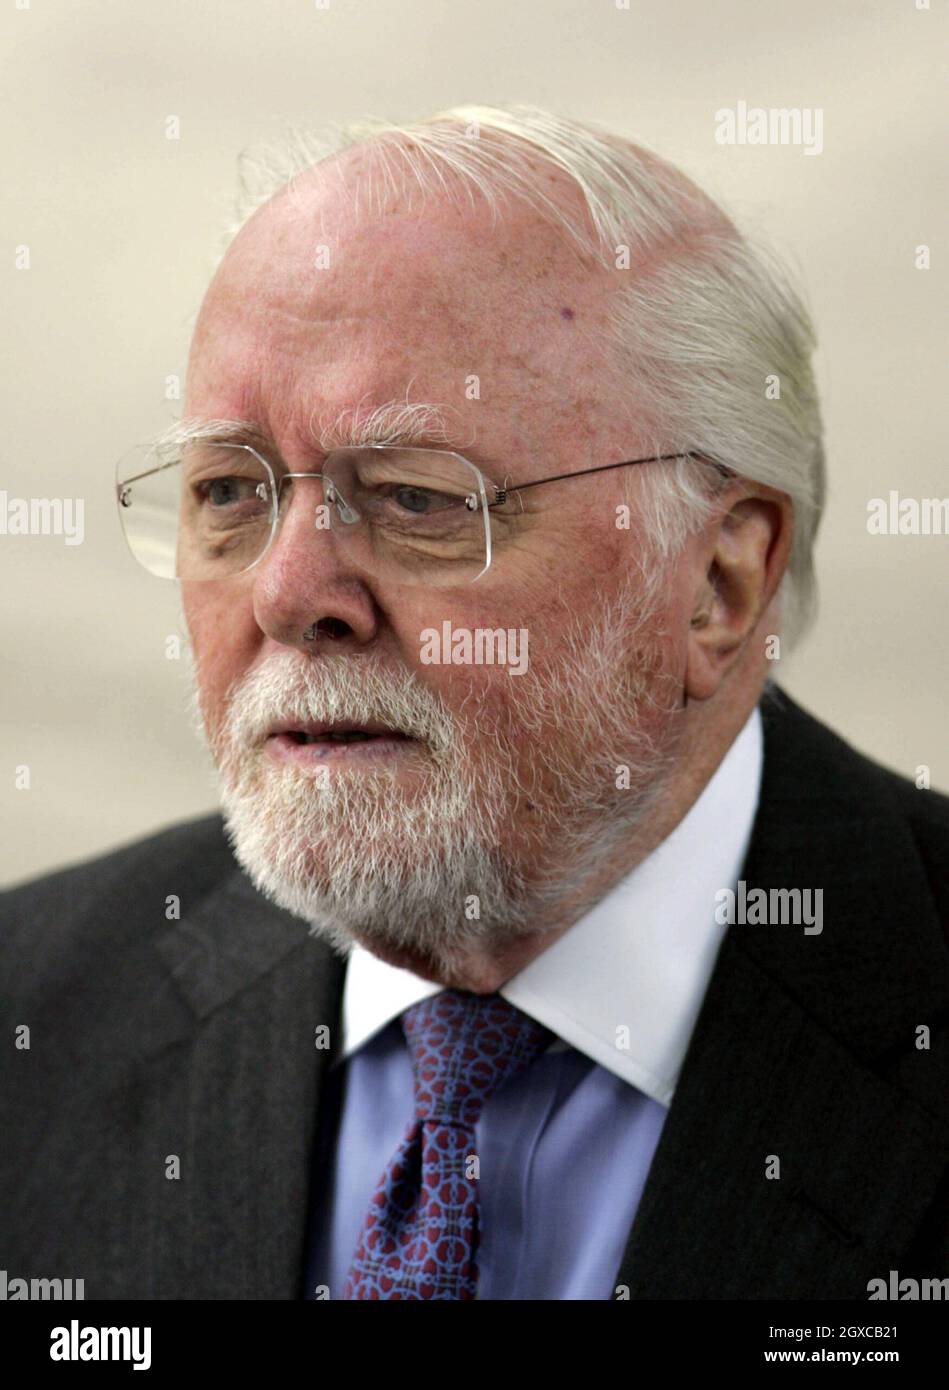 Richard Attenborough attends the Service to celebrate the life of Diana, Princess of Wales at the Guards Chapel in London. Stock Photo